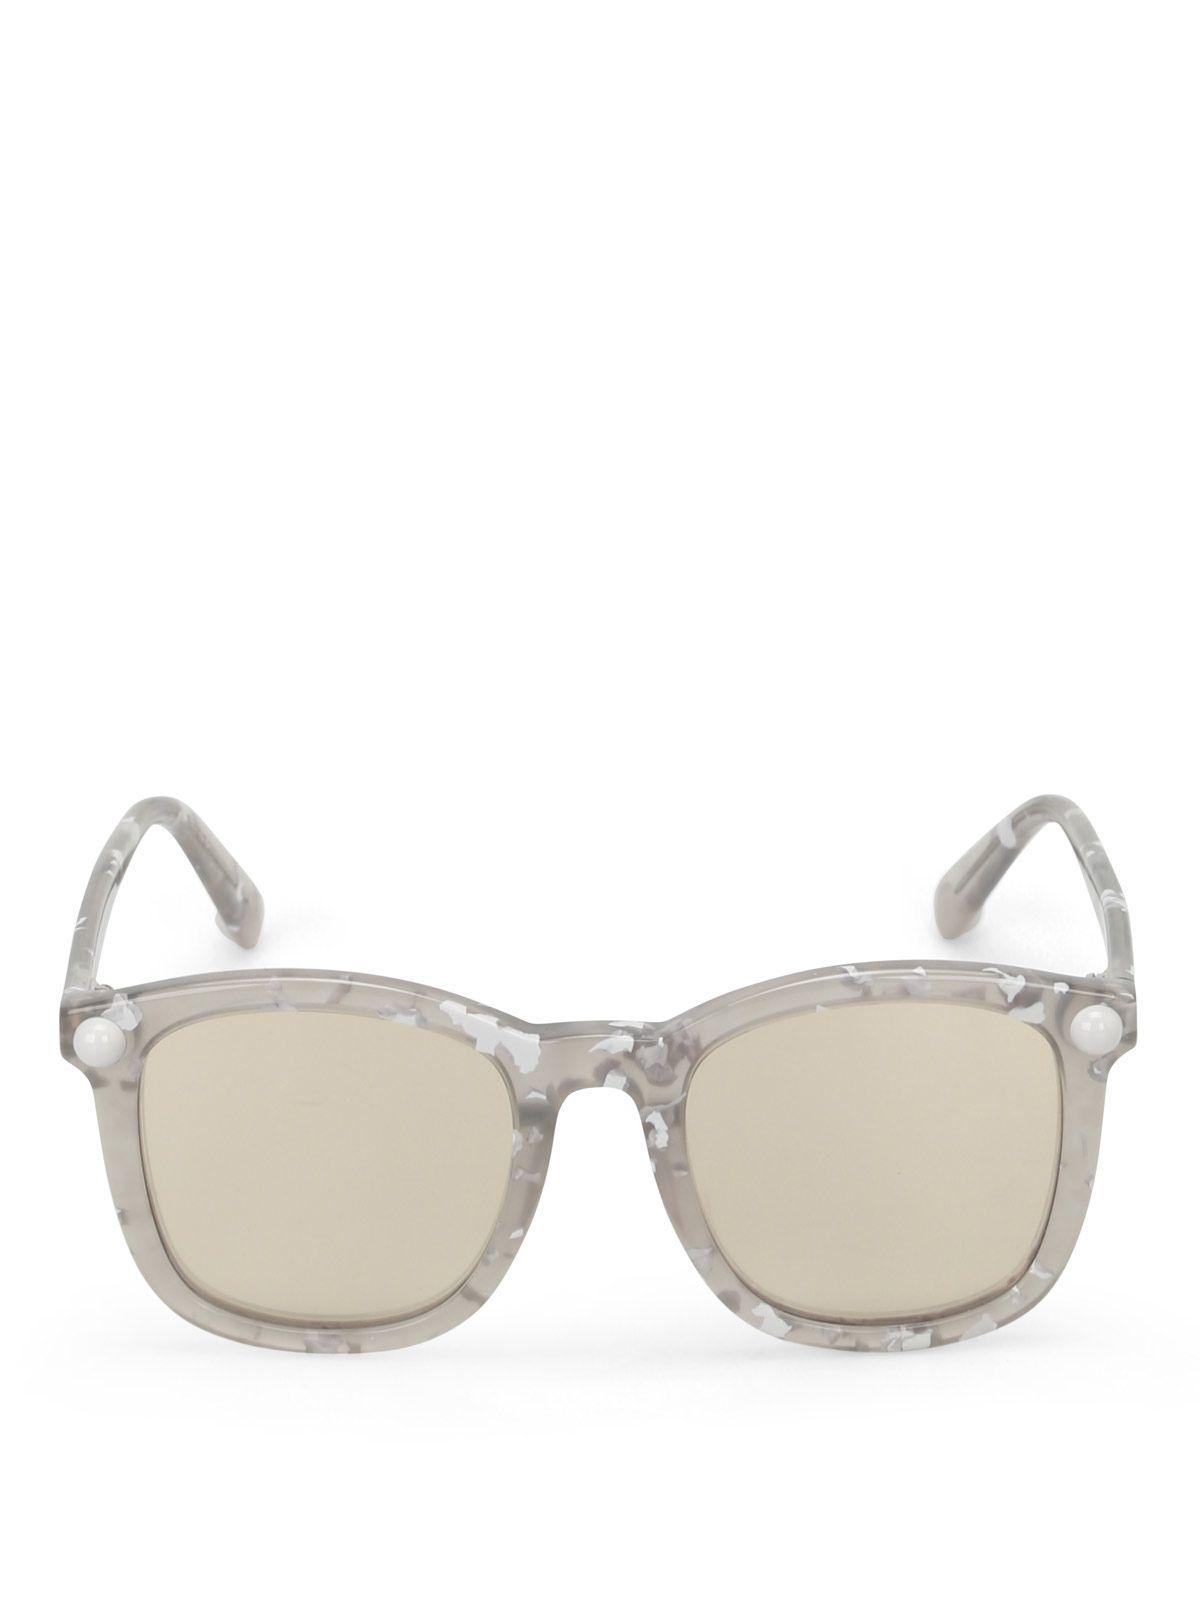 Christopher Kane Grey Acetate Sunglasses in Gray - Lyst